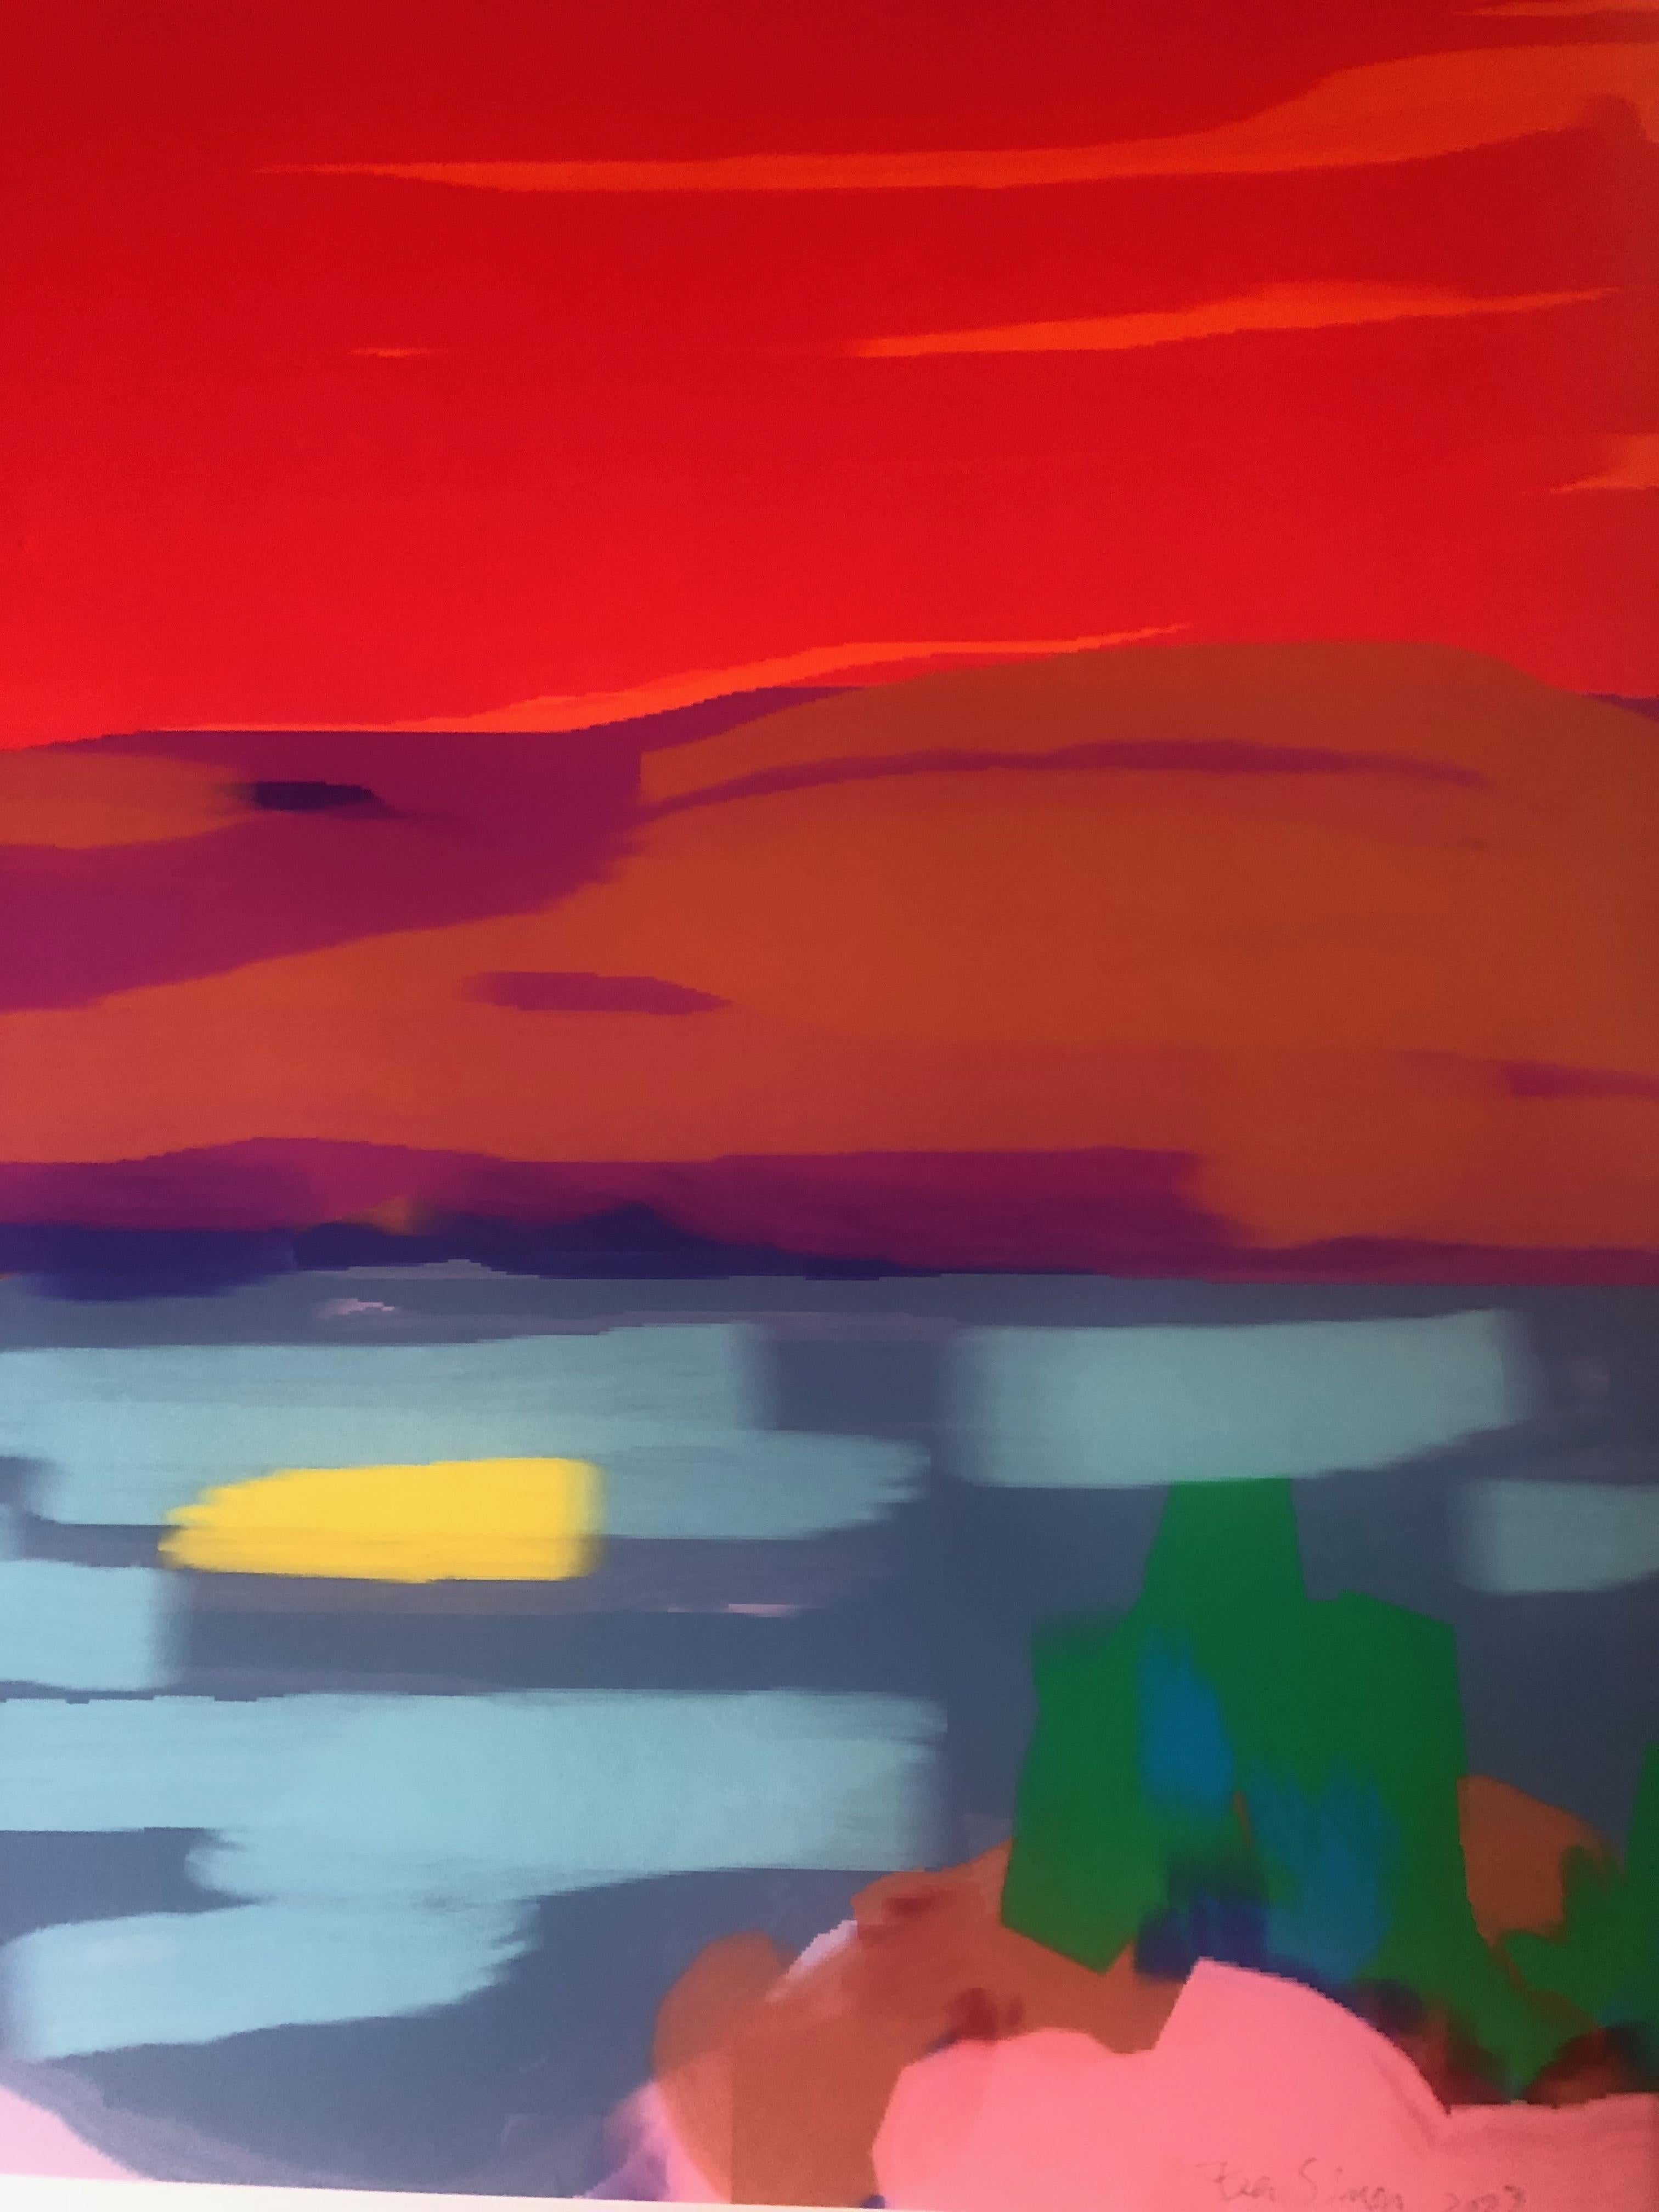 Untitled from Summer in Colors - Red Landscape Print by Ben Simon